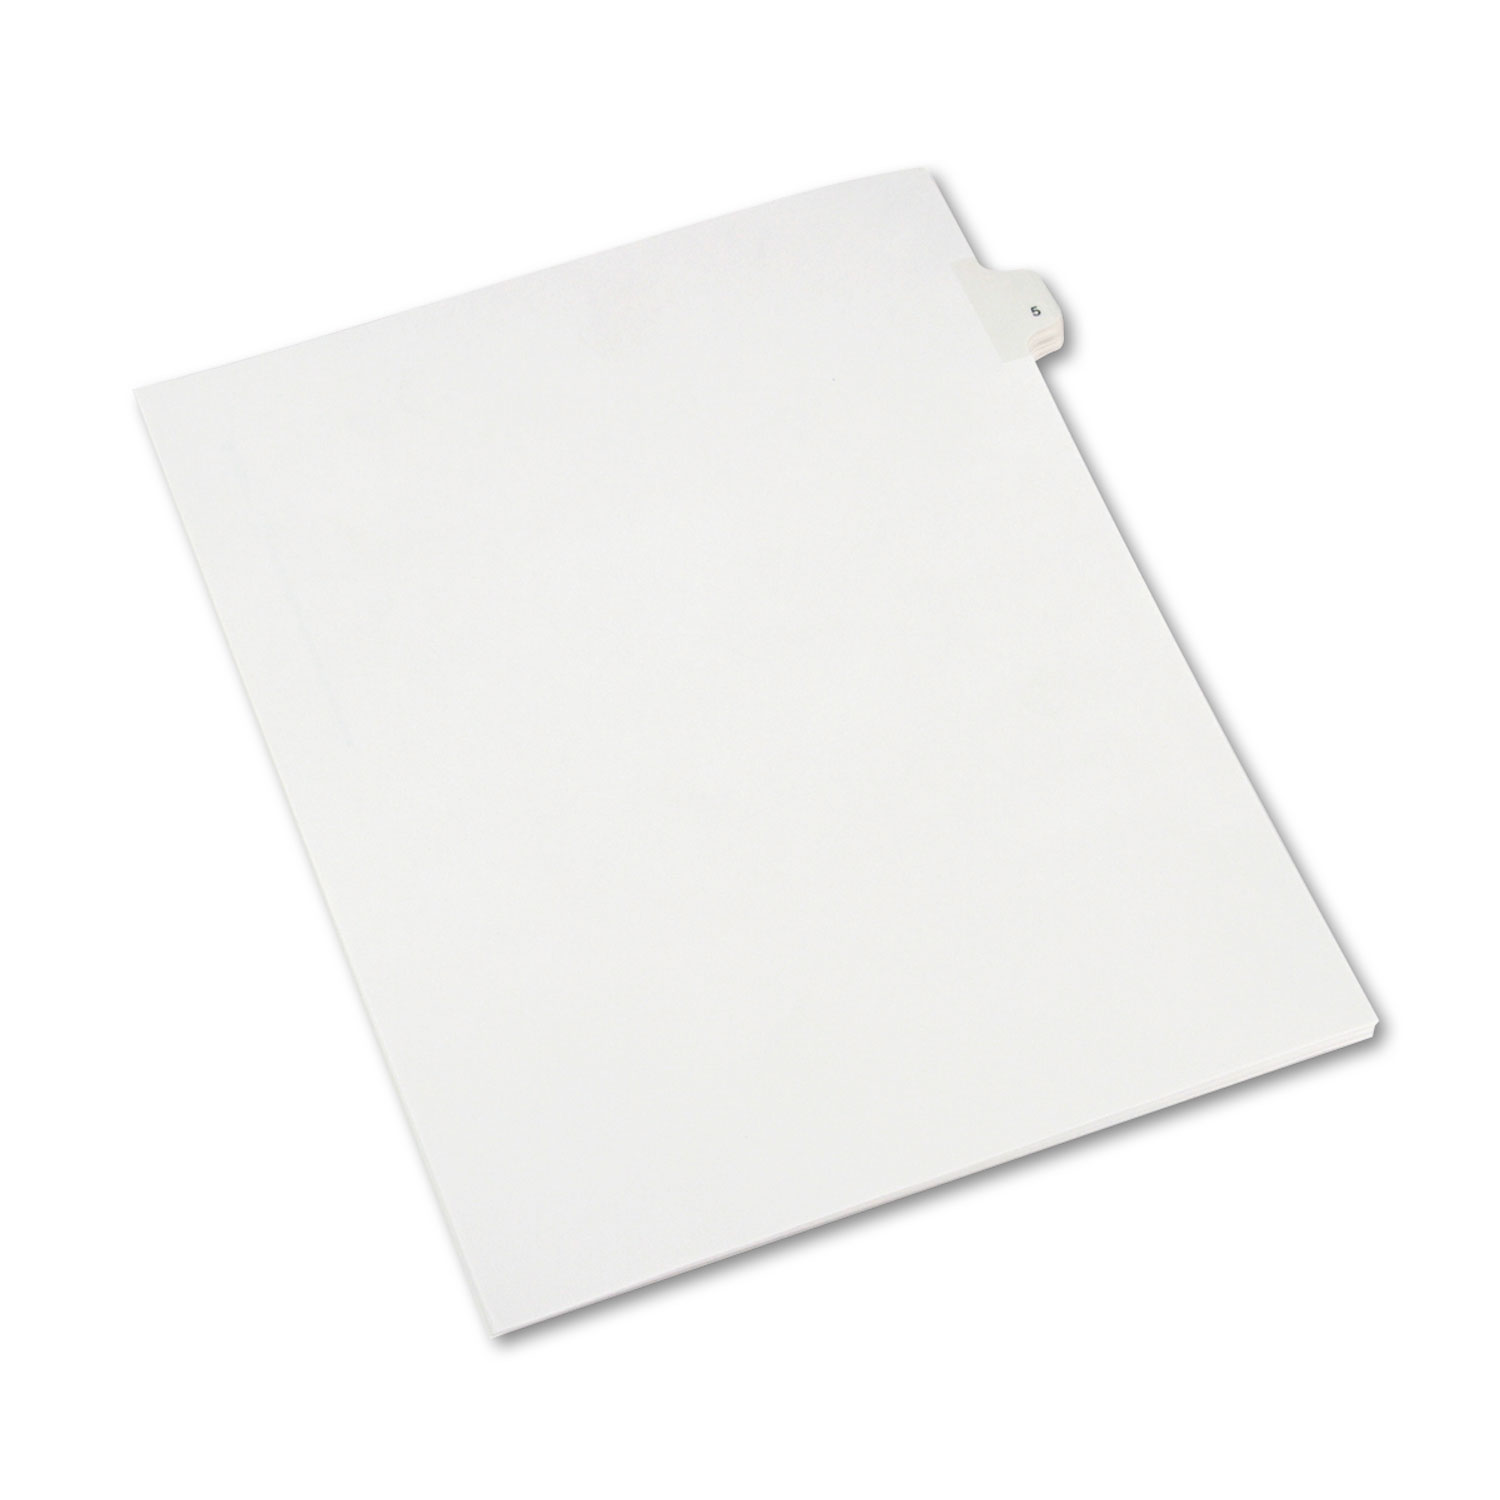 Avery AVE82203 Allstate-Style Legal Exhibit Side Tab Divider, Title: 5, Letter, White, 25/Pack